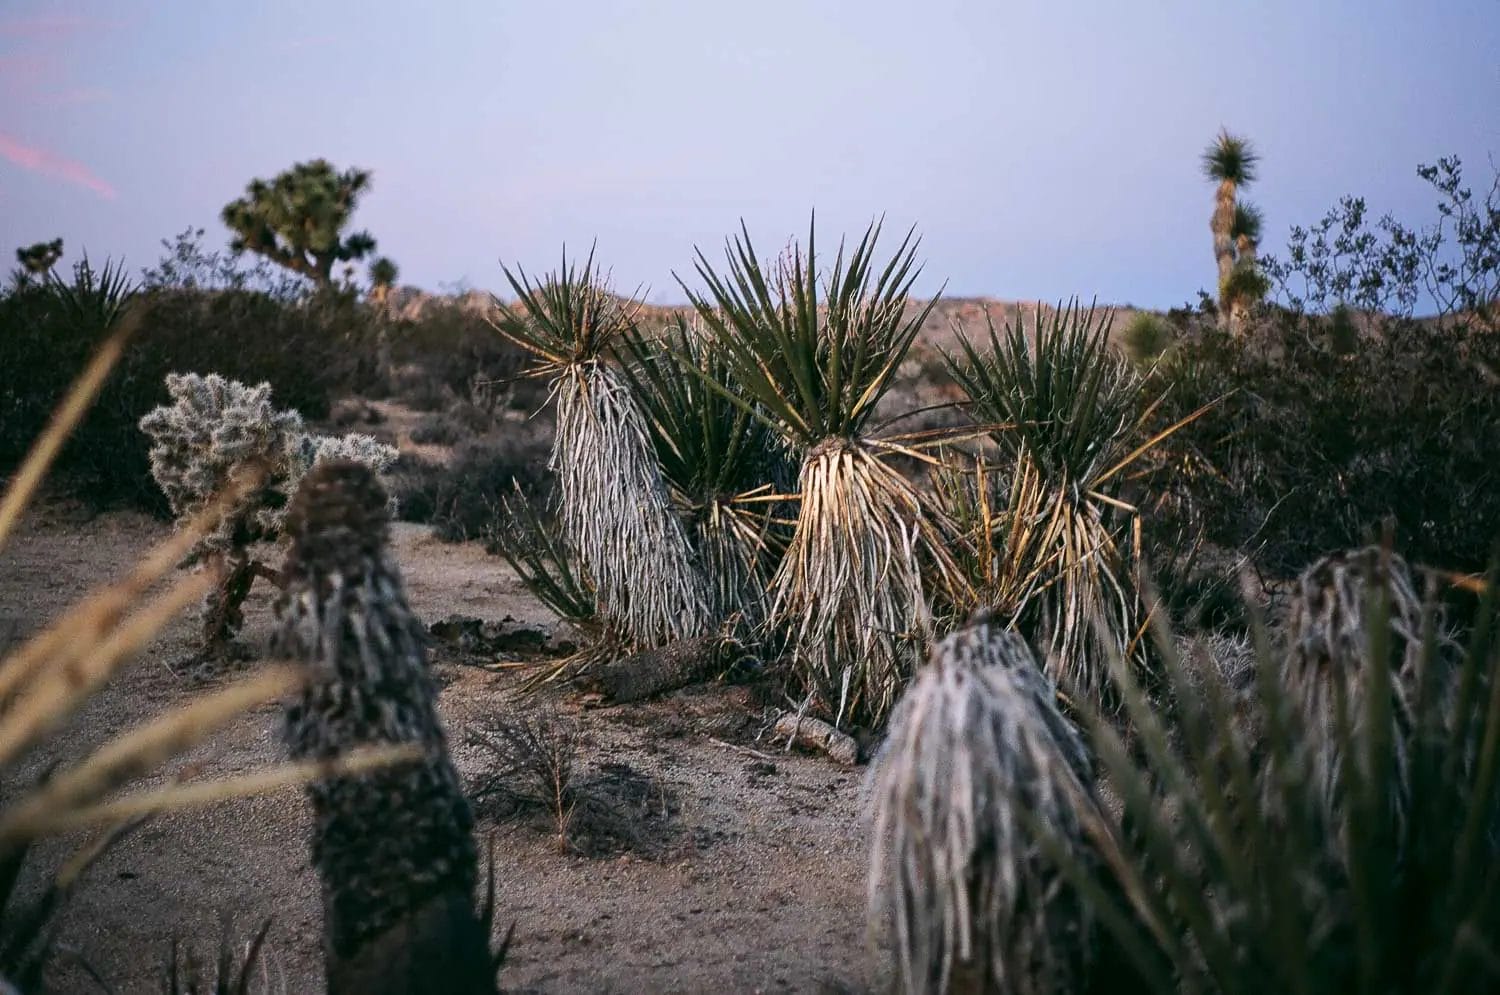 Twilight in the desert with yucca plants and cacti.